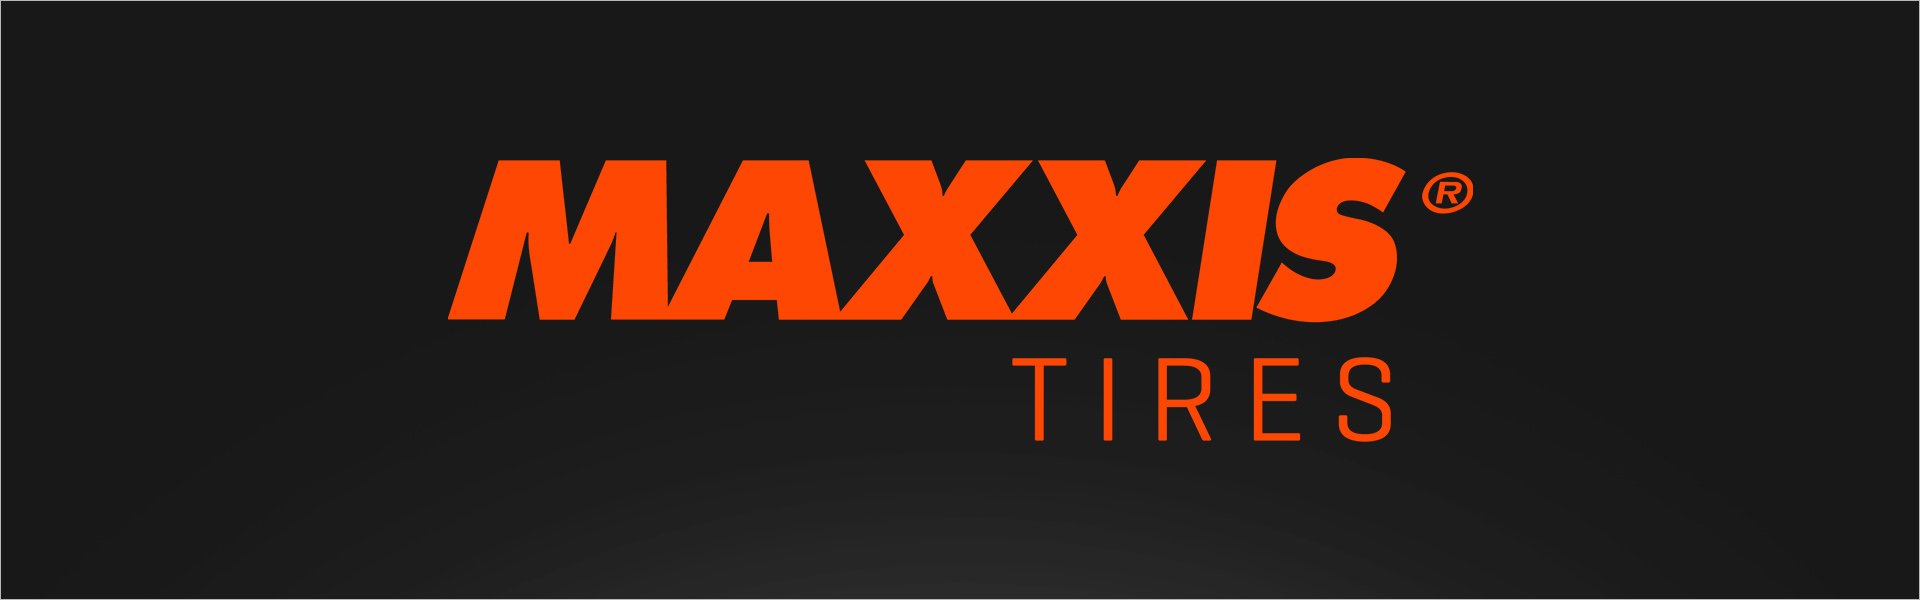 Maxxis ME3 185/60R15 84 H Maxxis